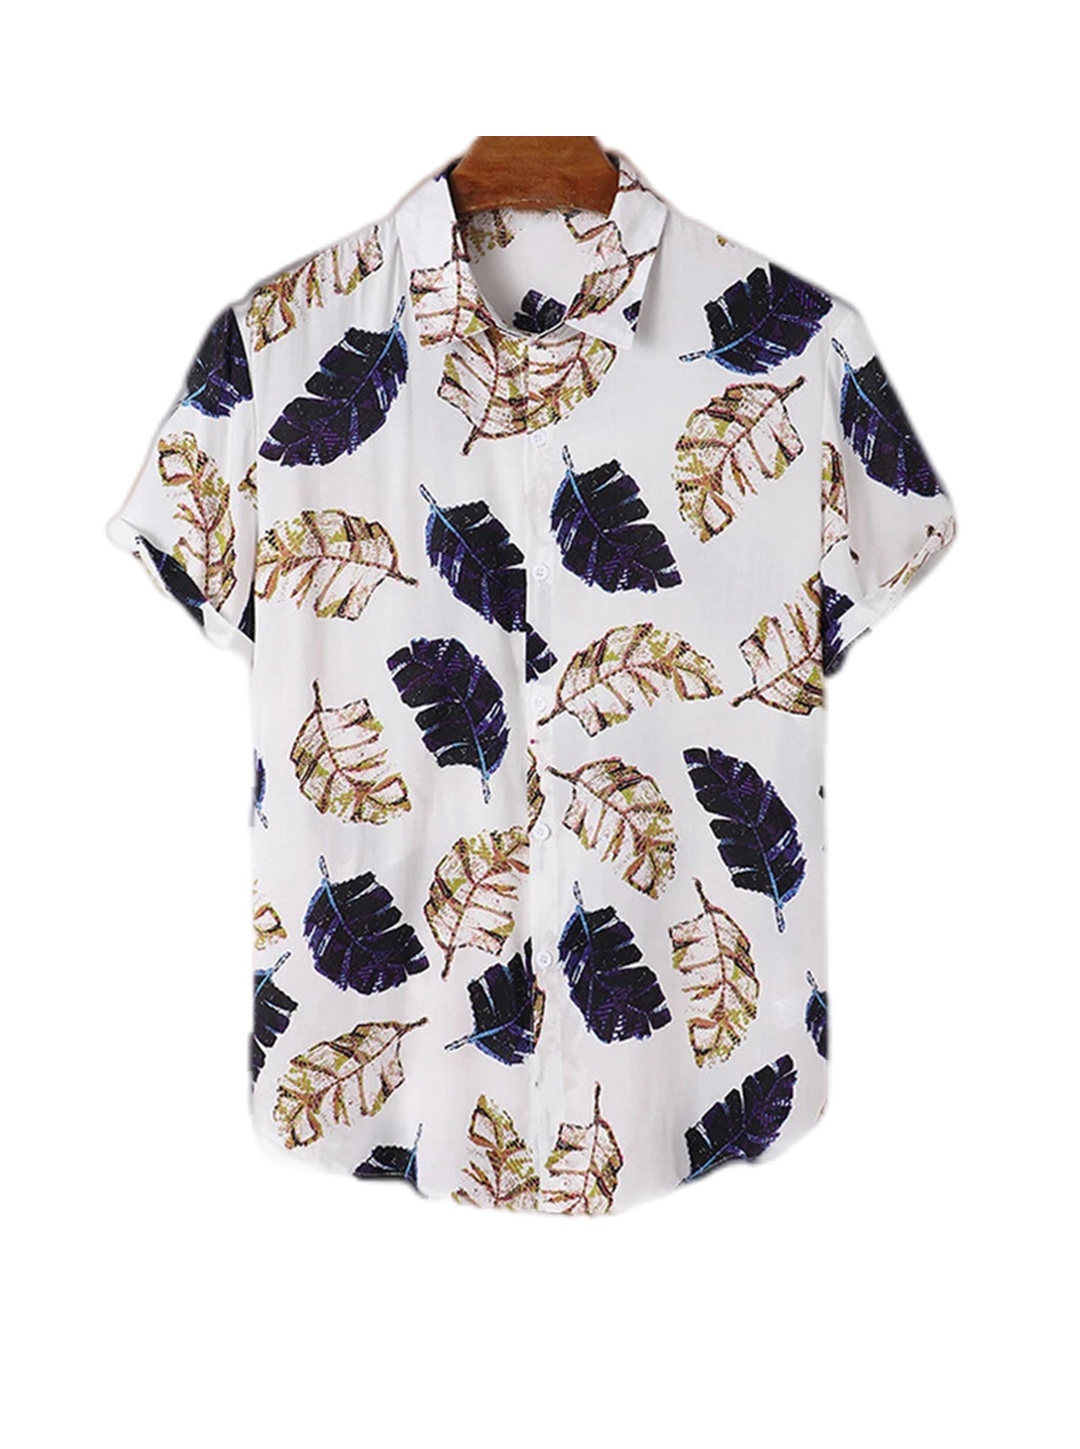 Patrick Print Feather Casual Daily Short Sleeve Shirt